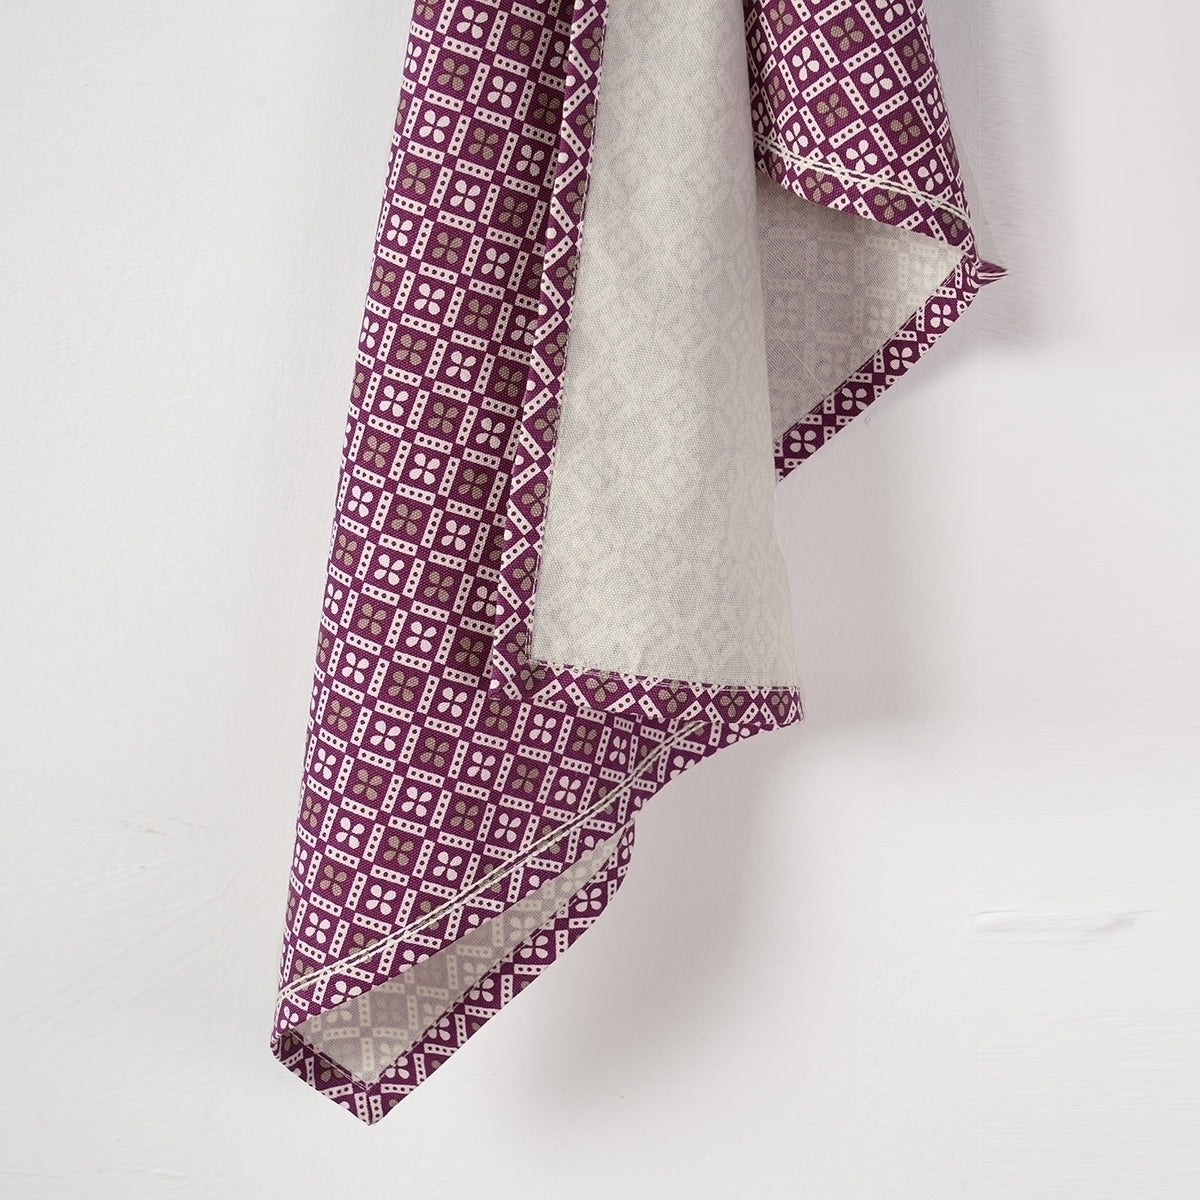 DOMINOTERIE Plum Printed Kitchen Towel, geometrical pattern, 100% cotton, size 20"X28"